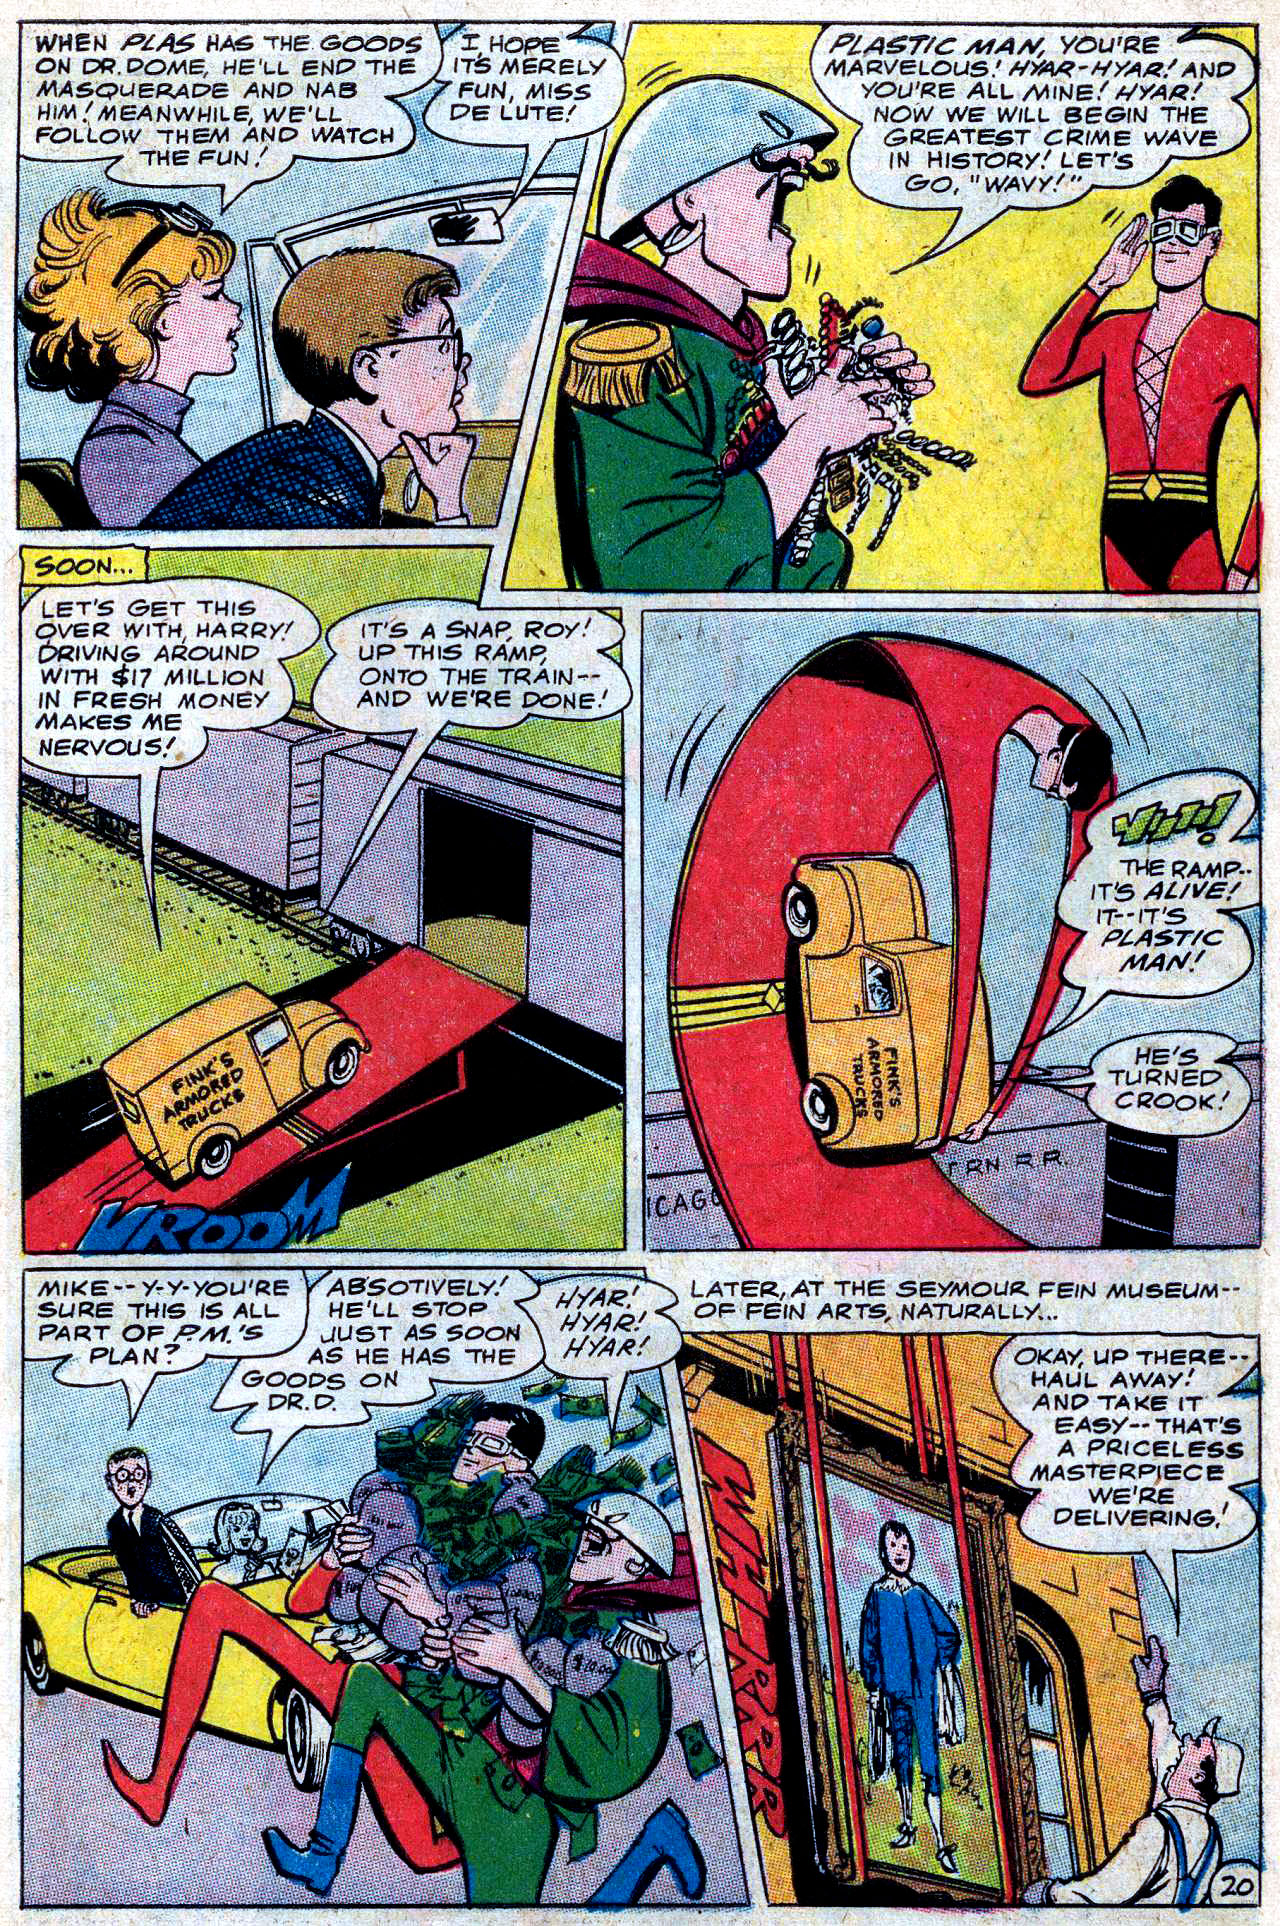 Plastic Man (1966) issue 4 - Page 22